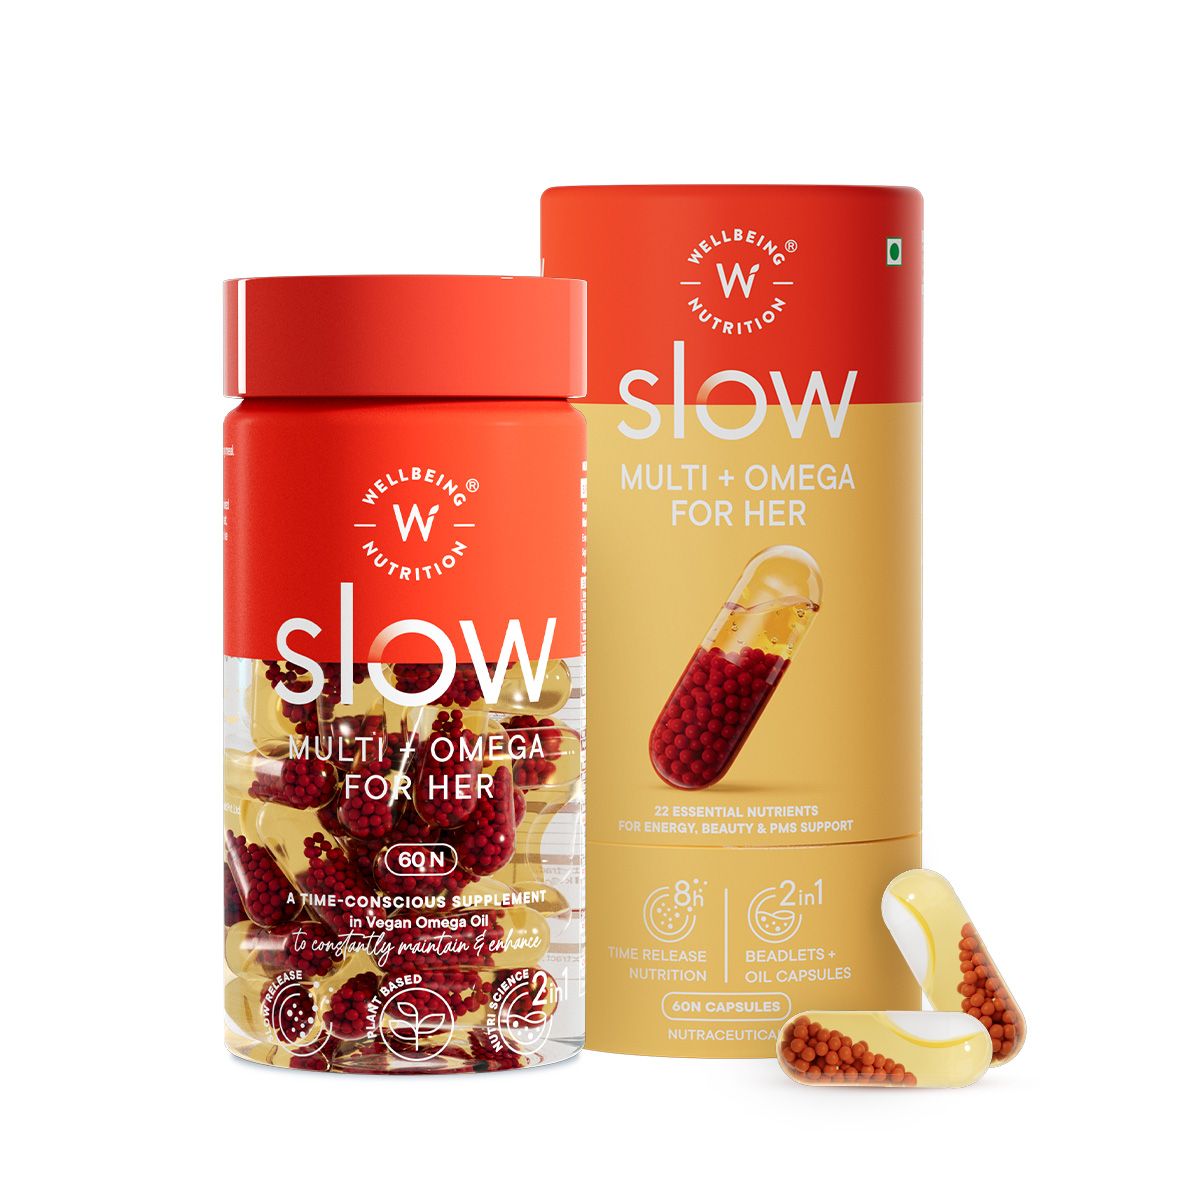 Wellbeing Nutrition Slow- Multivitamin for Women 50+ with 23 Vitamins and Minerals with Vegan Omega